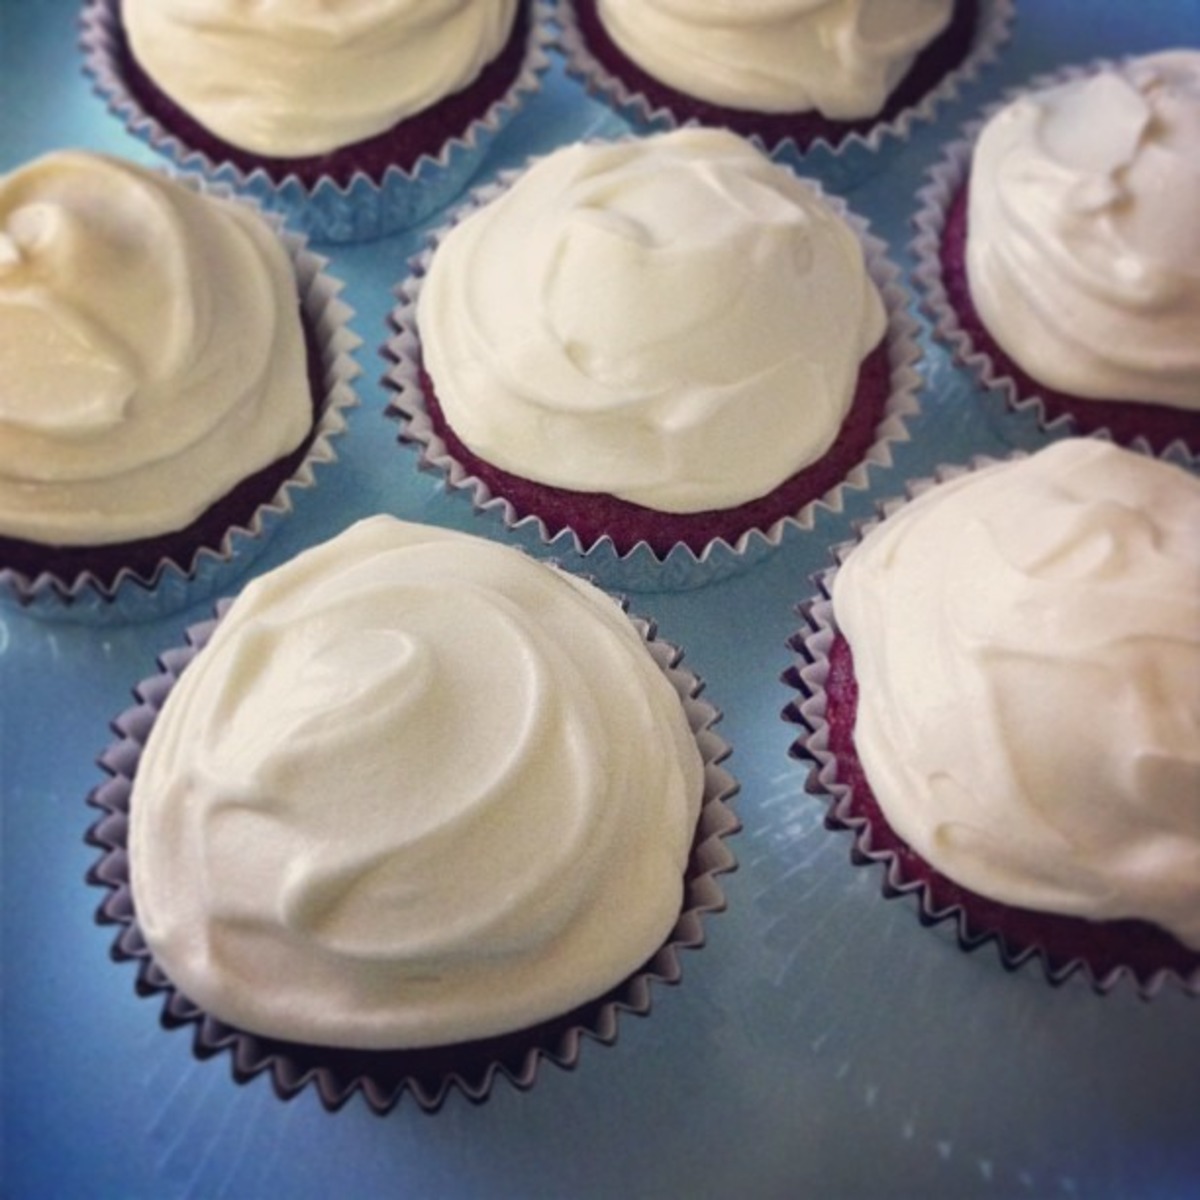 Red Velvet Cupcakes With Cream Cheese Frosting (Vegan) image